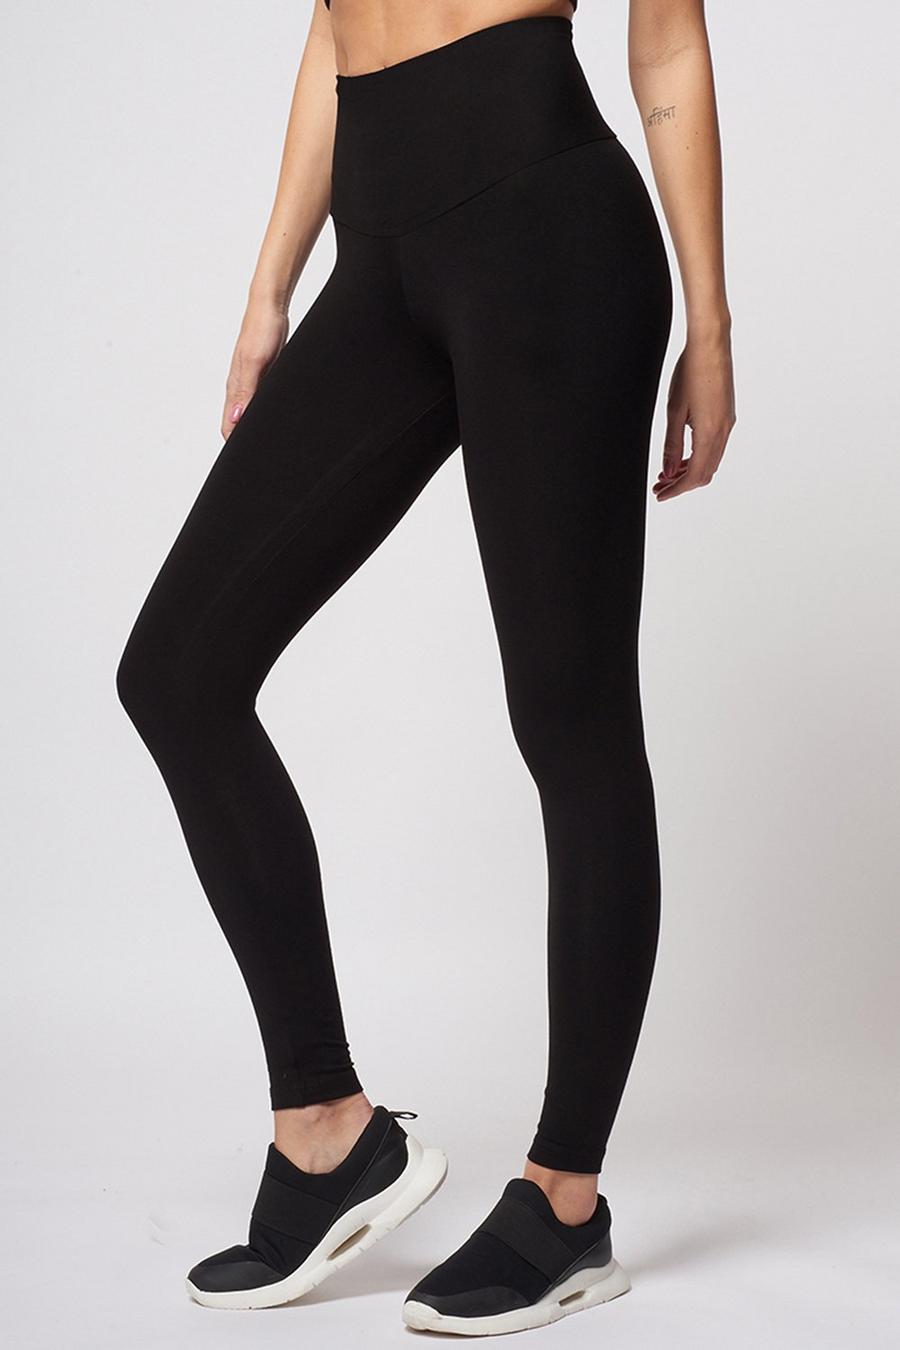 Black Tummy Control Extra Strong Compression Full Length Leggings SHORT